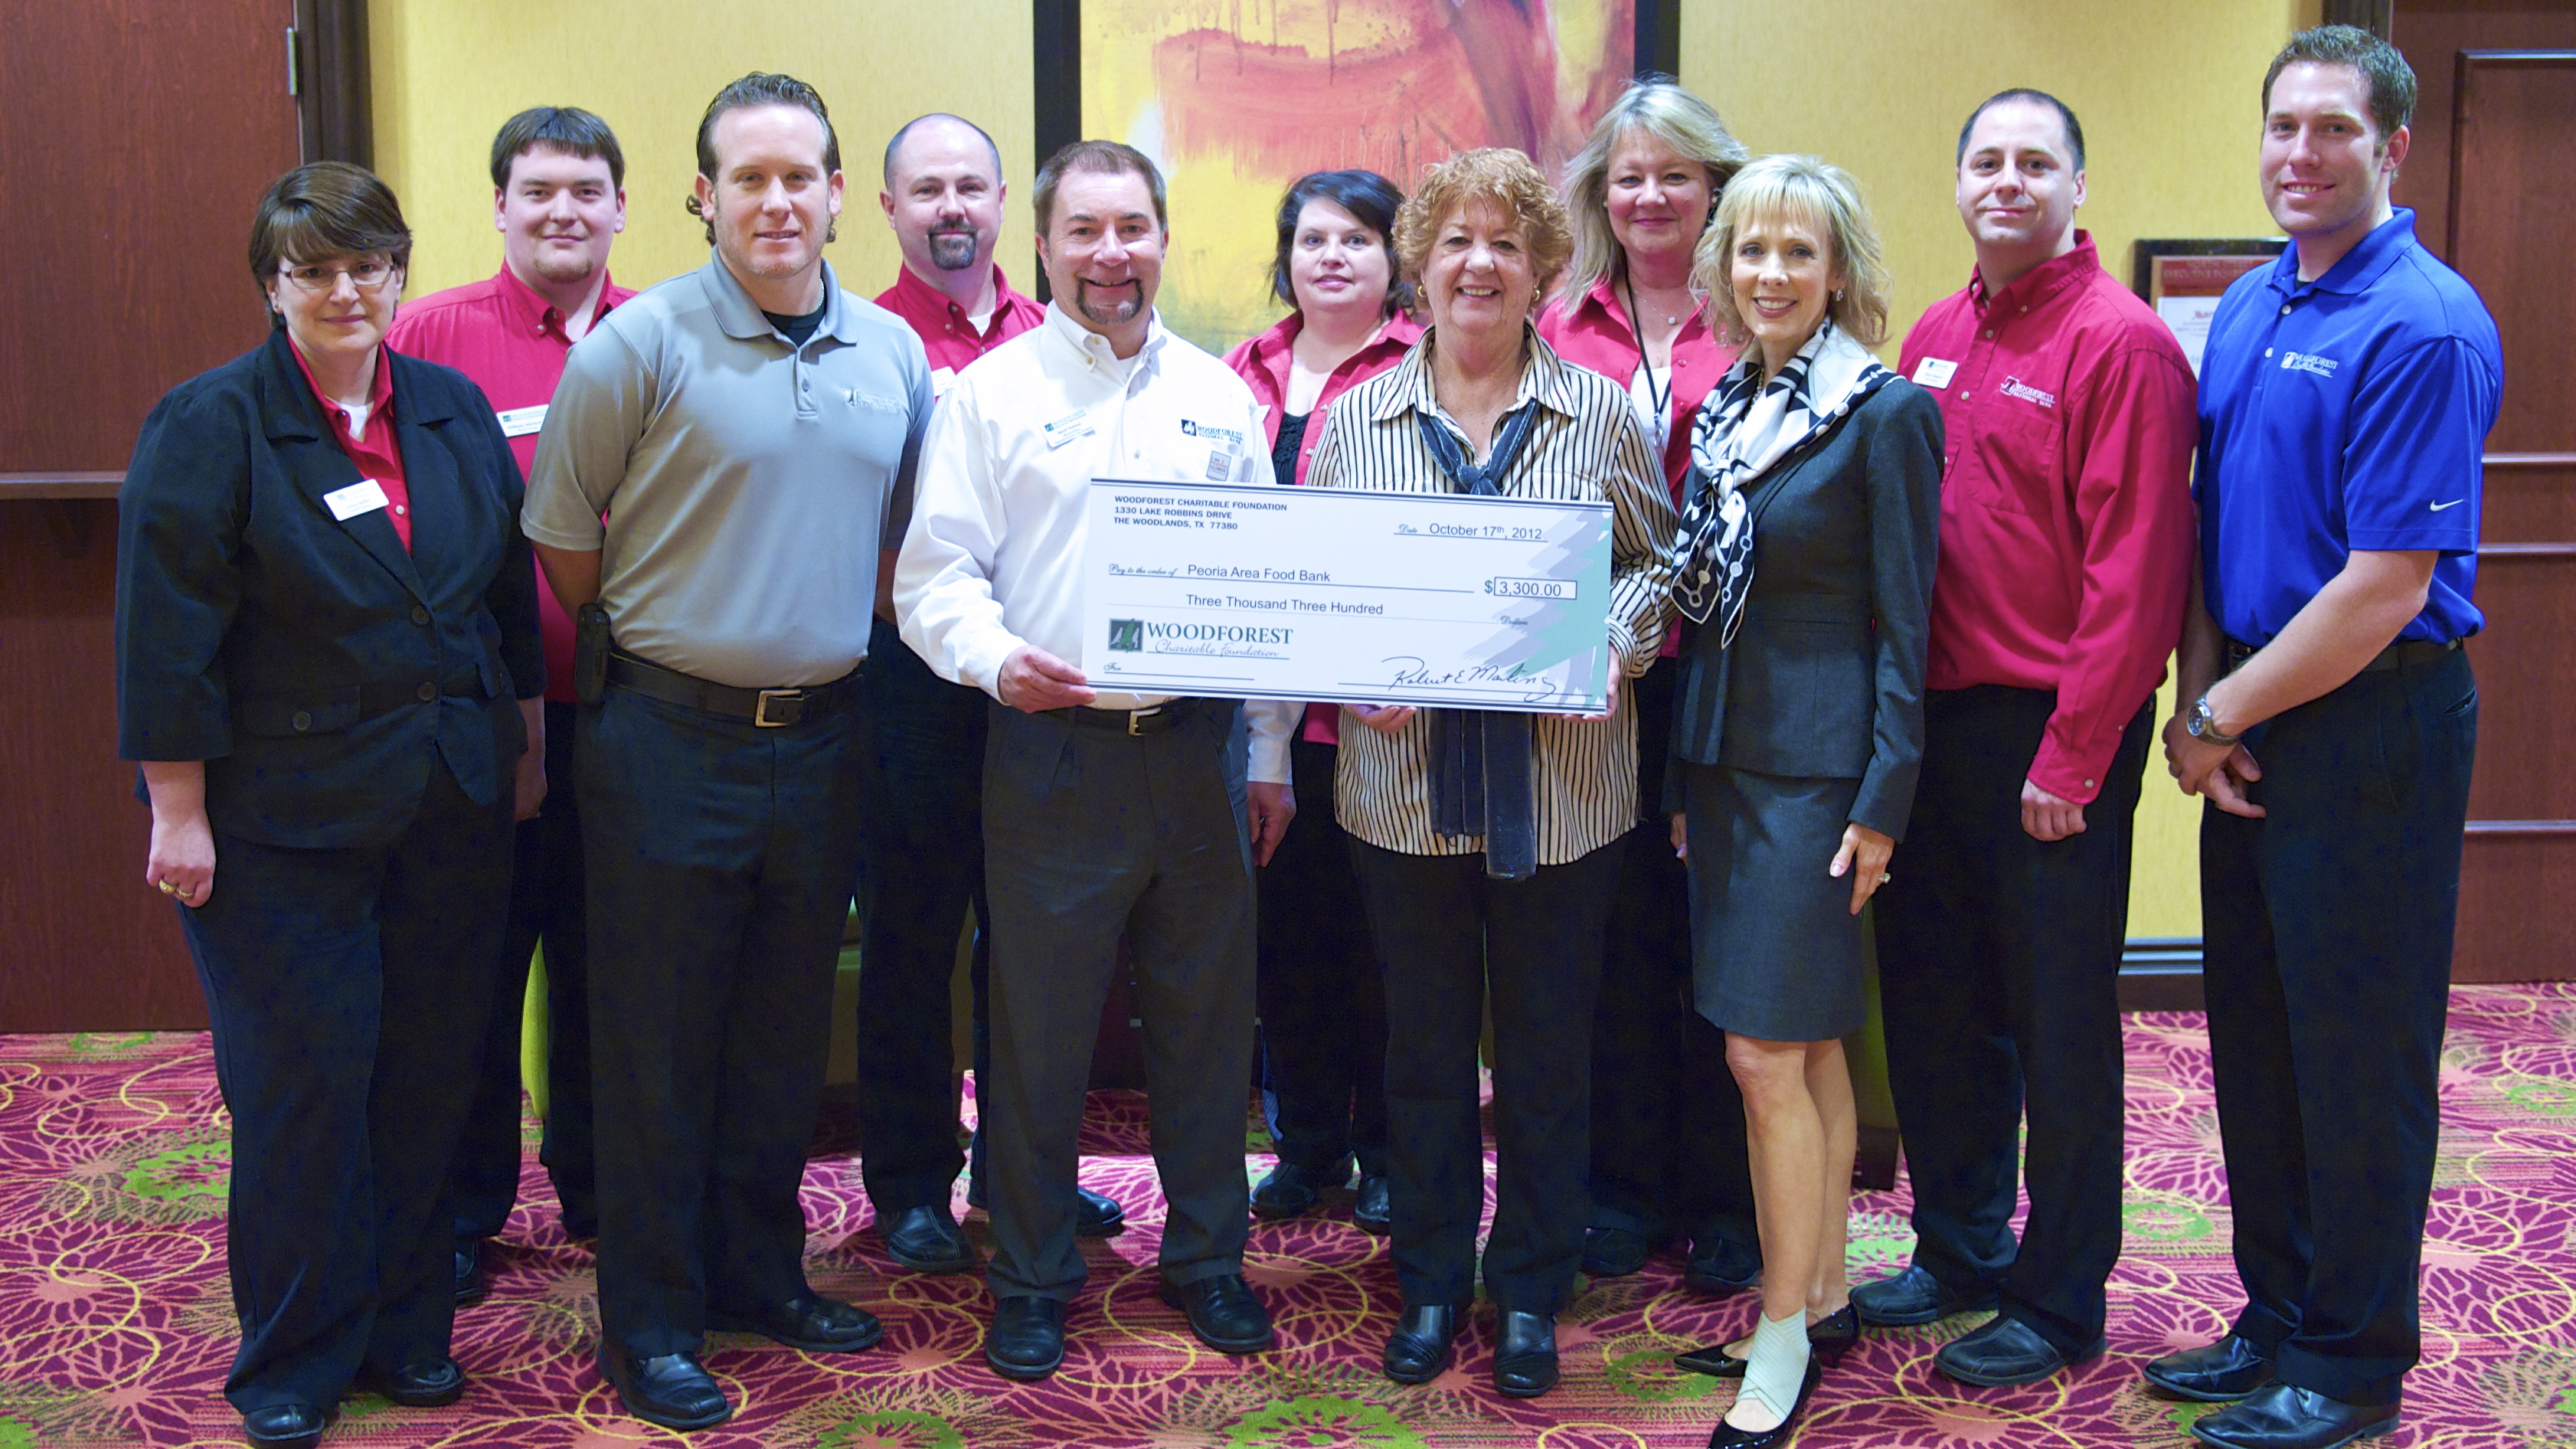 Peoria Area Food Bank receives $3,300 donation from WCF.